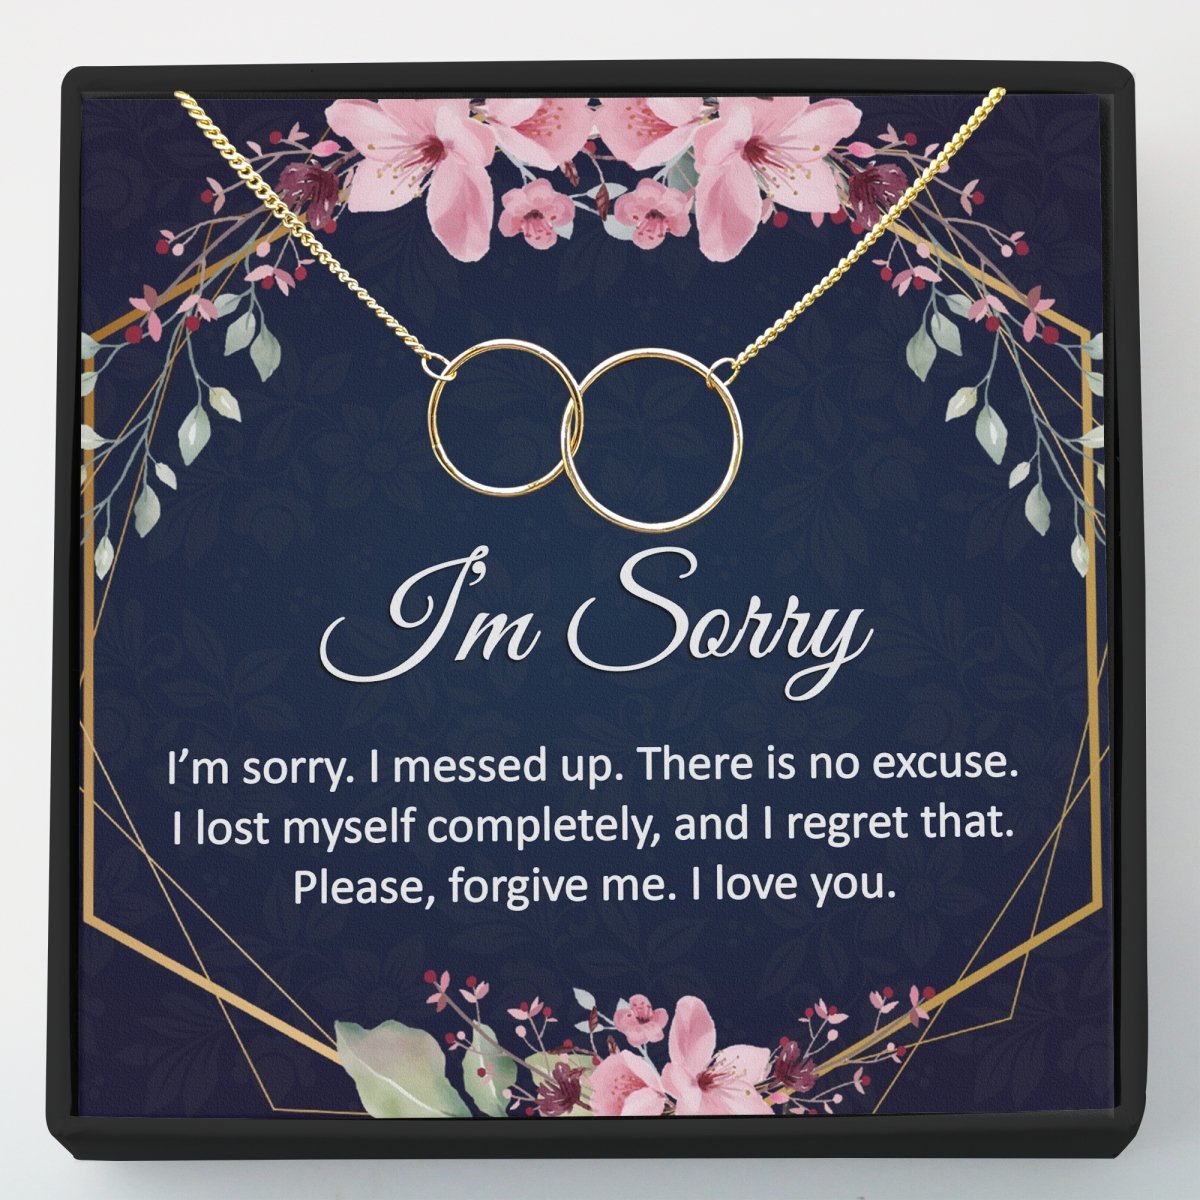 Apology I am Sorry Forgiveness Gift from Boyfriend Husband - Meaningful Cards